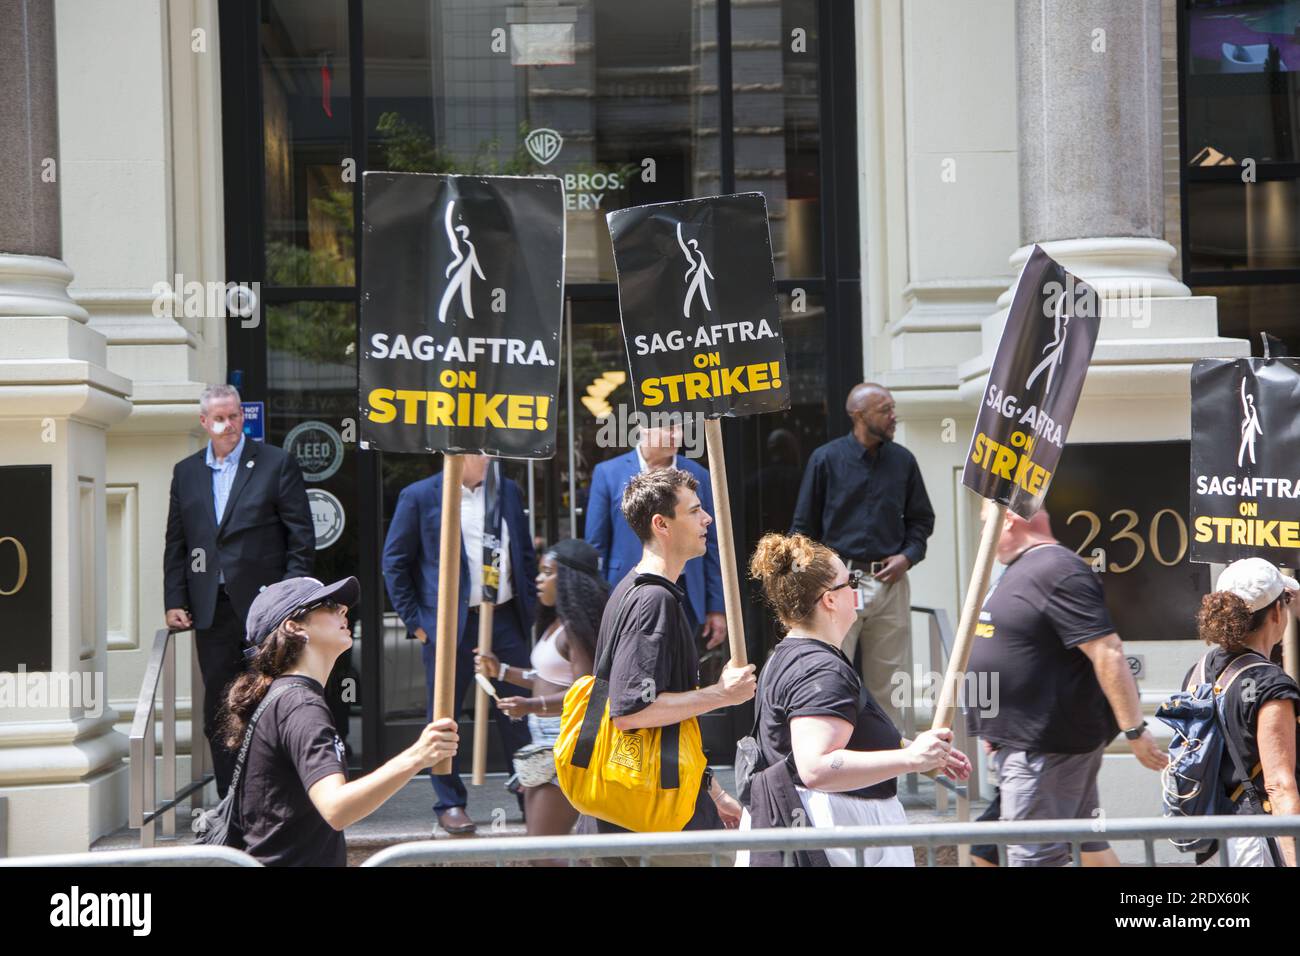 New York City: The strike continues among Writers Guild of America along with SAG-AFTRA  Union members with picket lines in multiple locations in in Manhattan crippling the entertainment industry. Union members picket in front of Warner Brothers building in Manhattan. Stock Photo